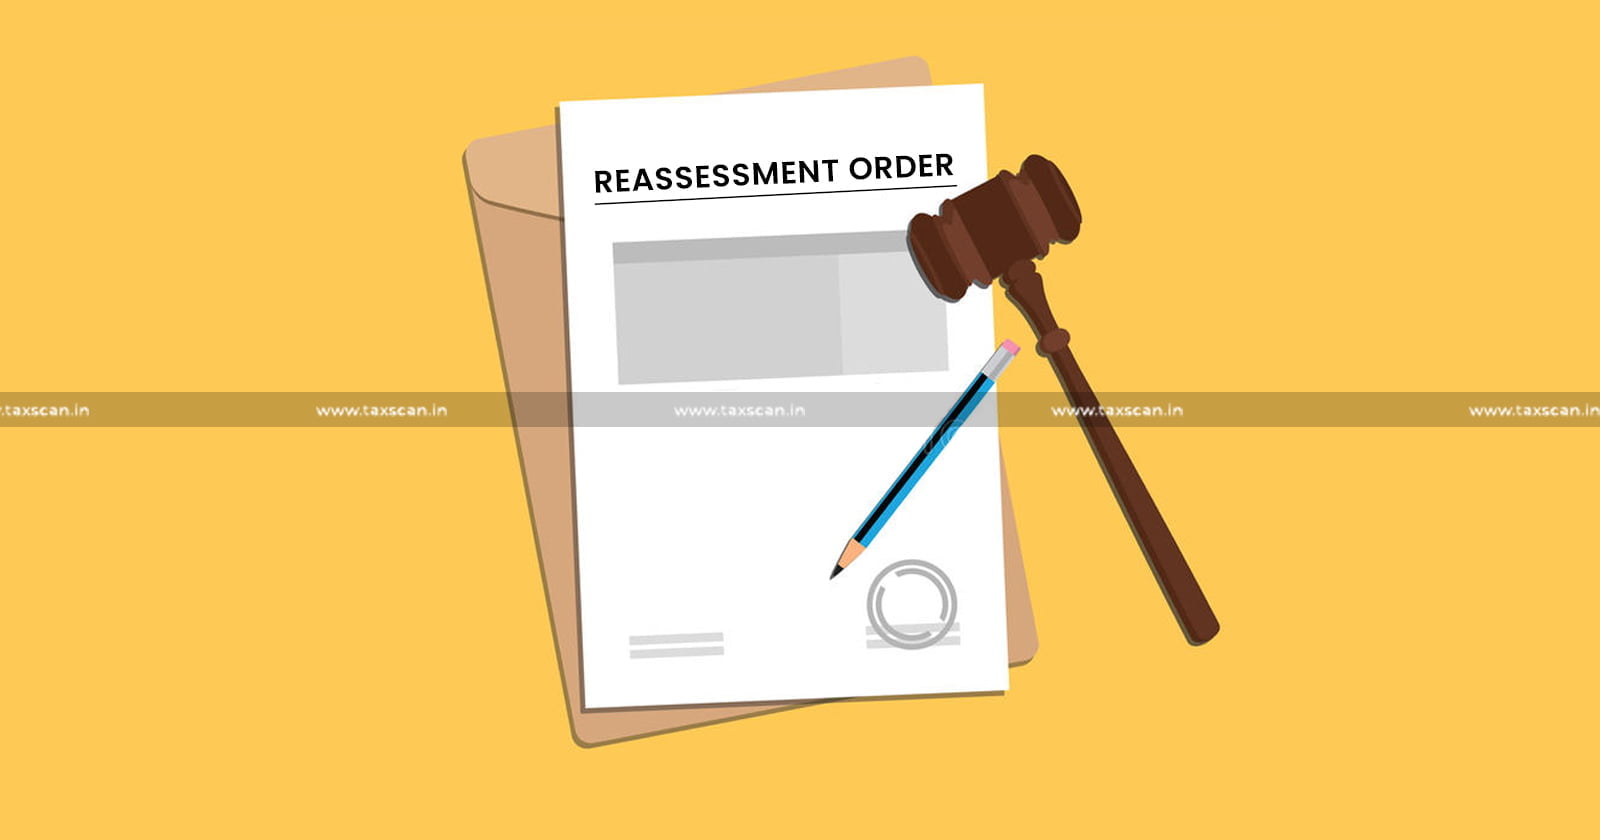 assessee - Delhi high court - Income Tax - Reassessment Order - taxscan